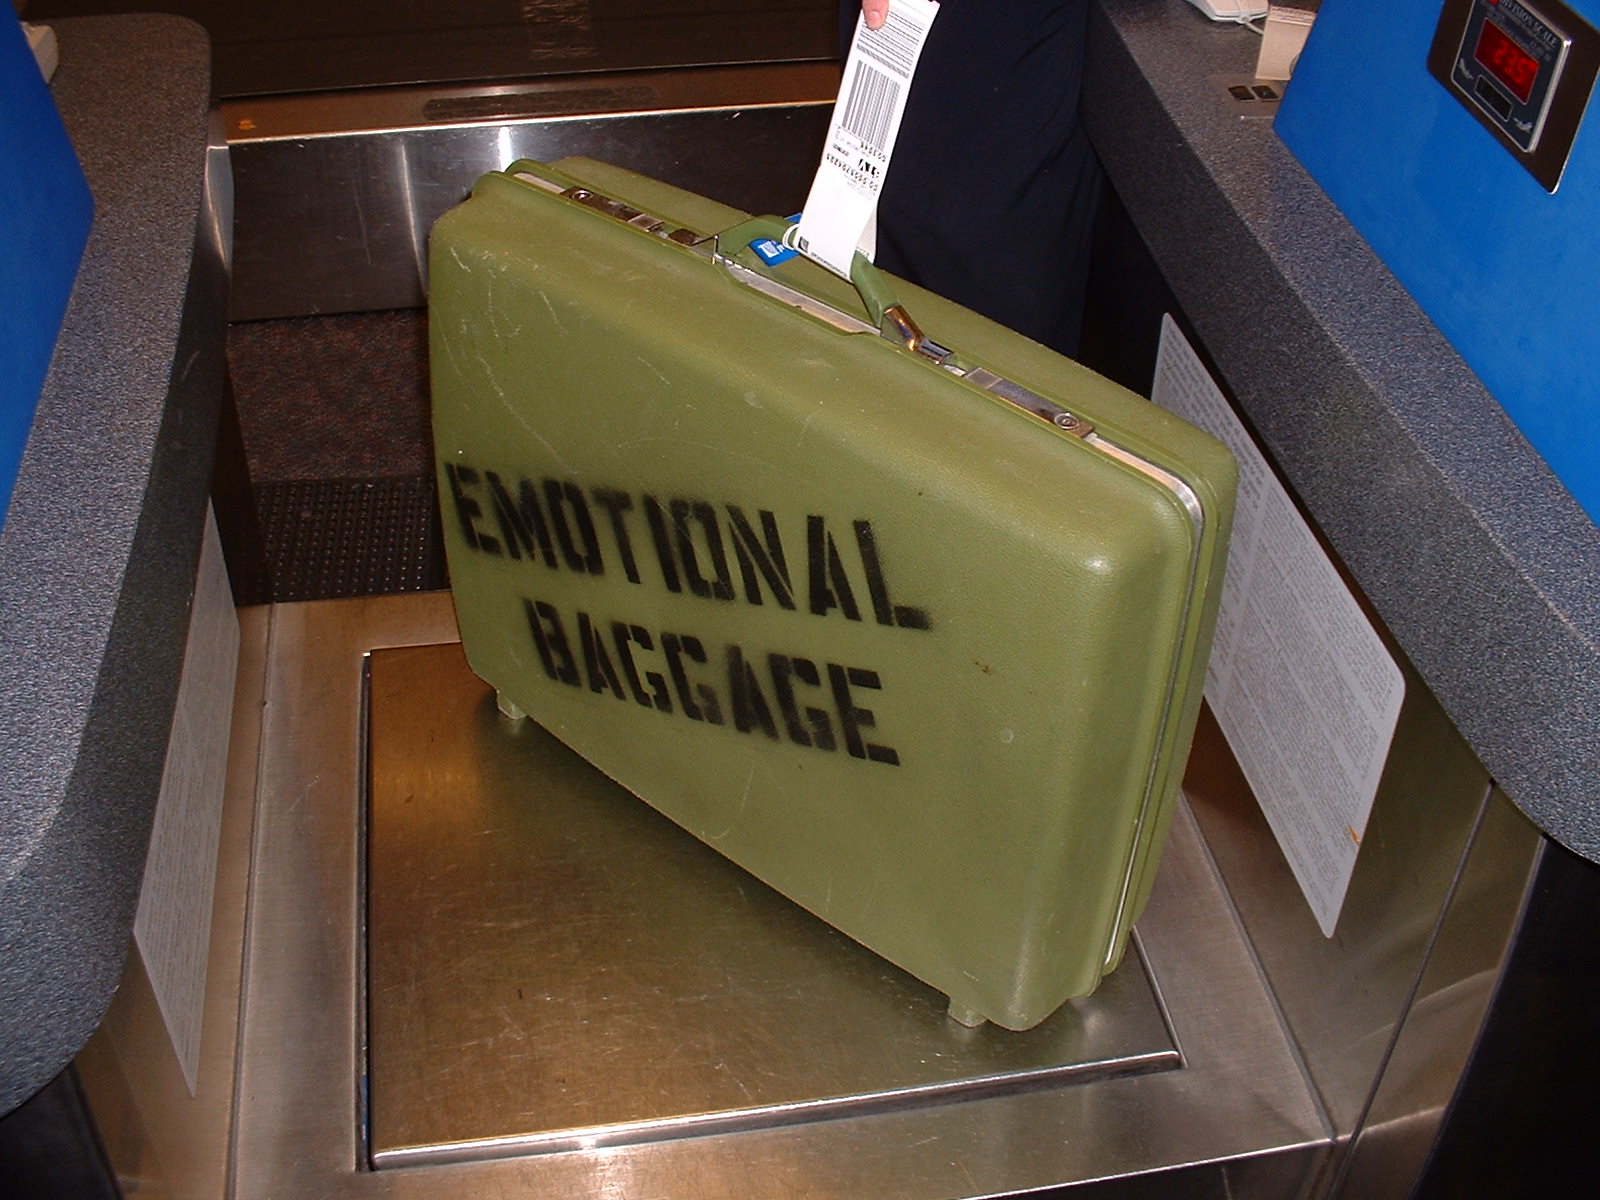 Image: Retro green suitcase with 'Emotional Baggage' stenciled on side being weighed.